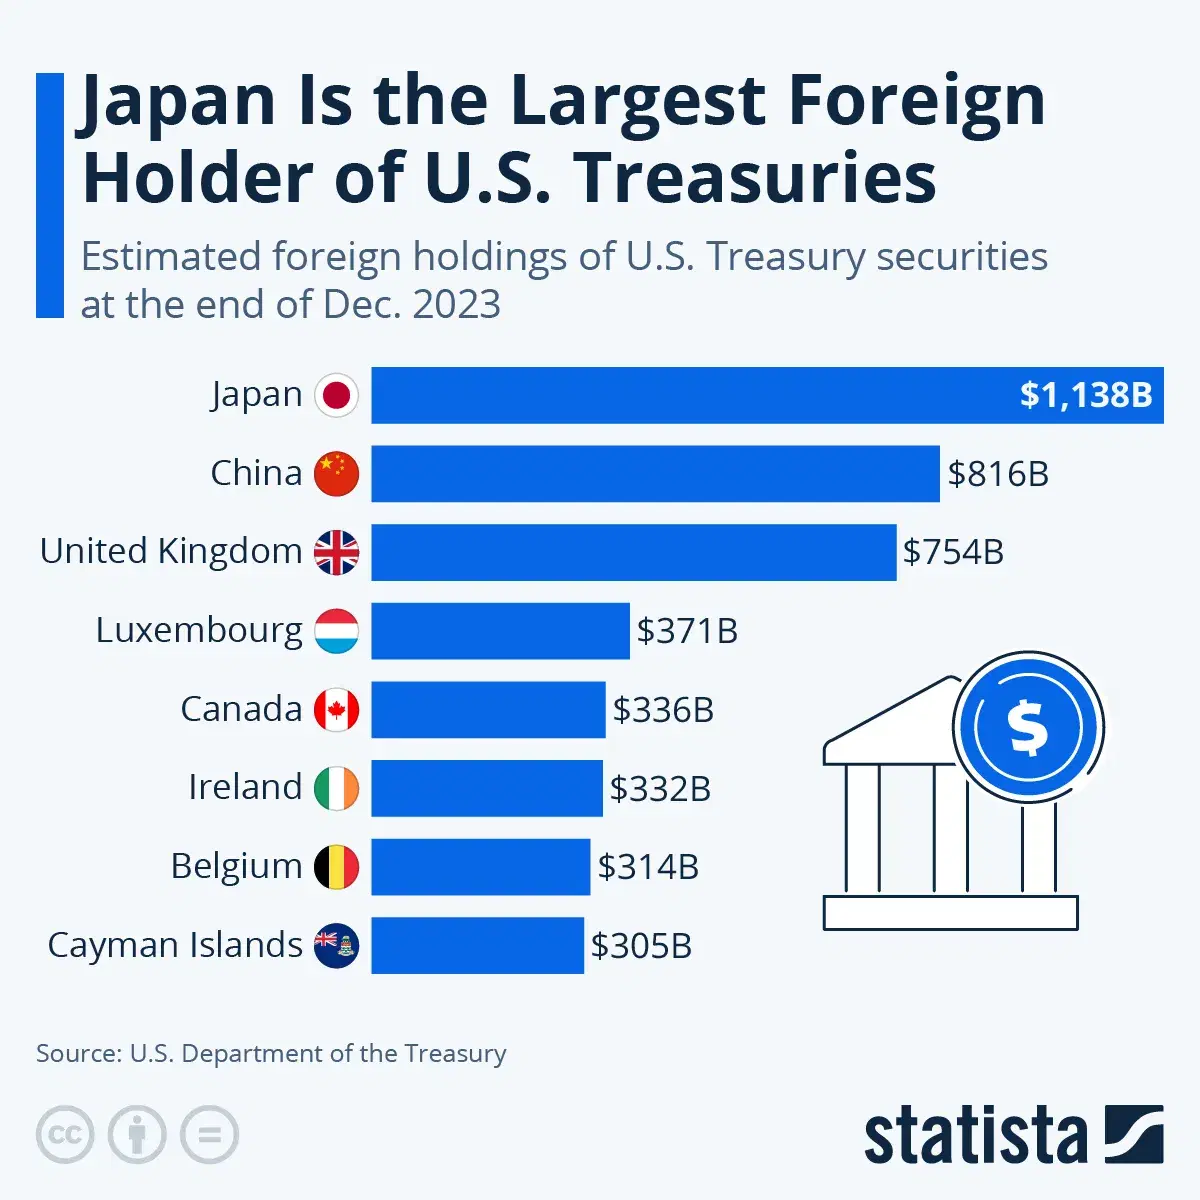 Japan Is the Largest Foreign Holder of U.S. Treasuries